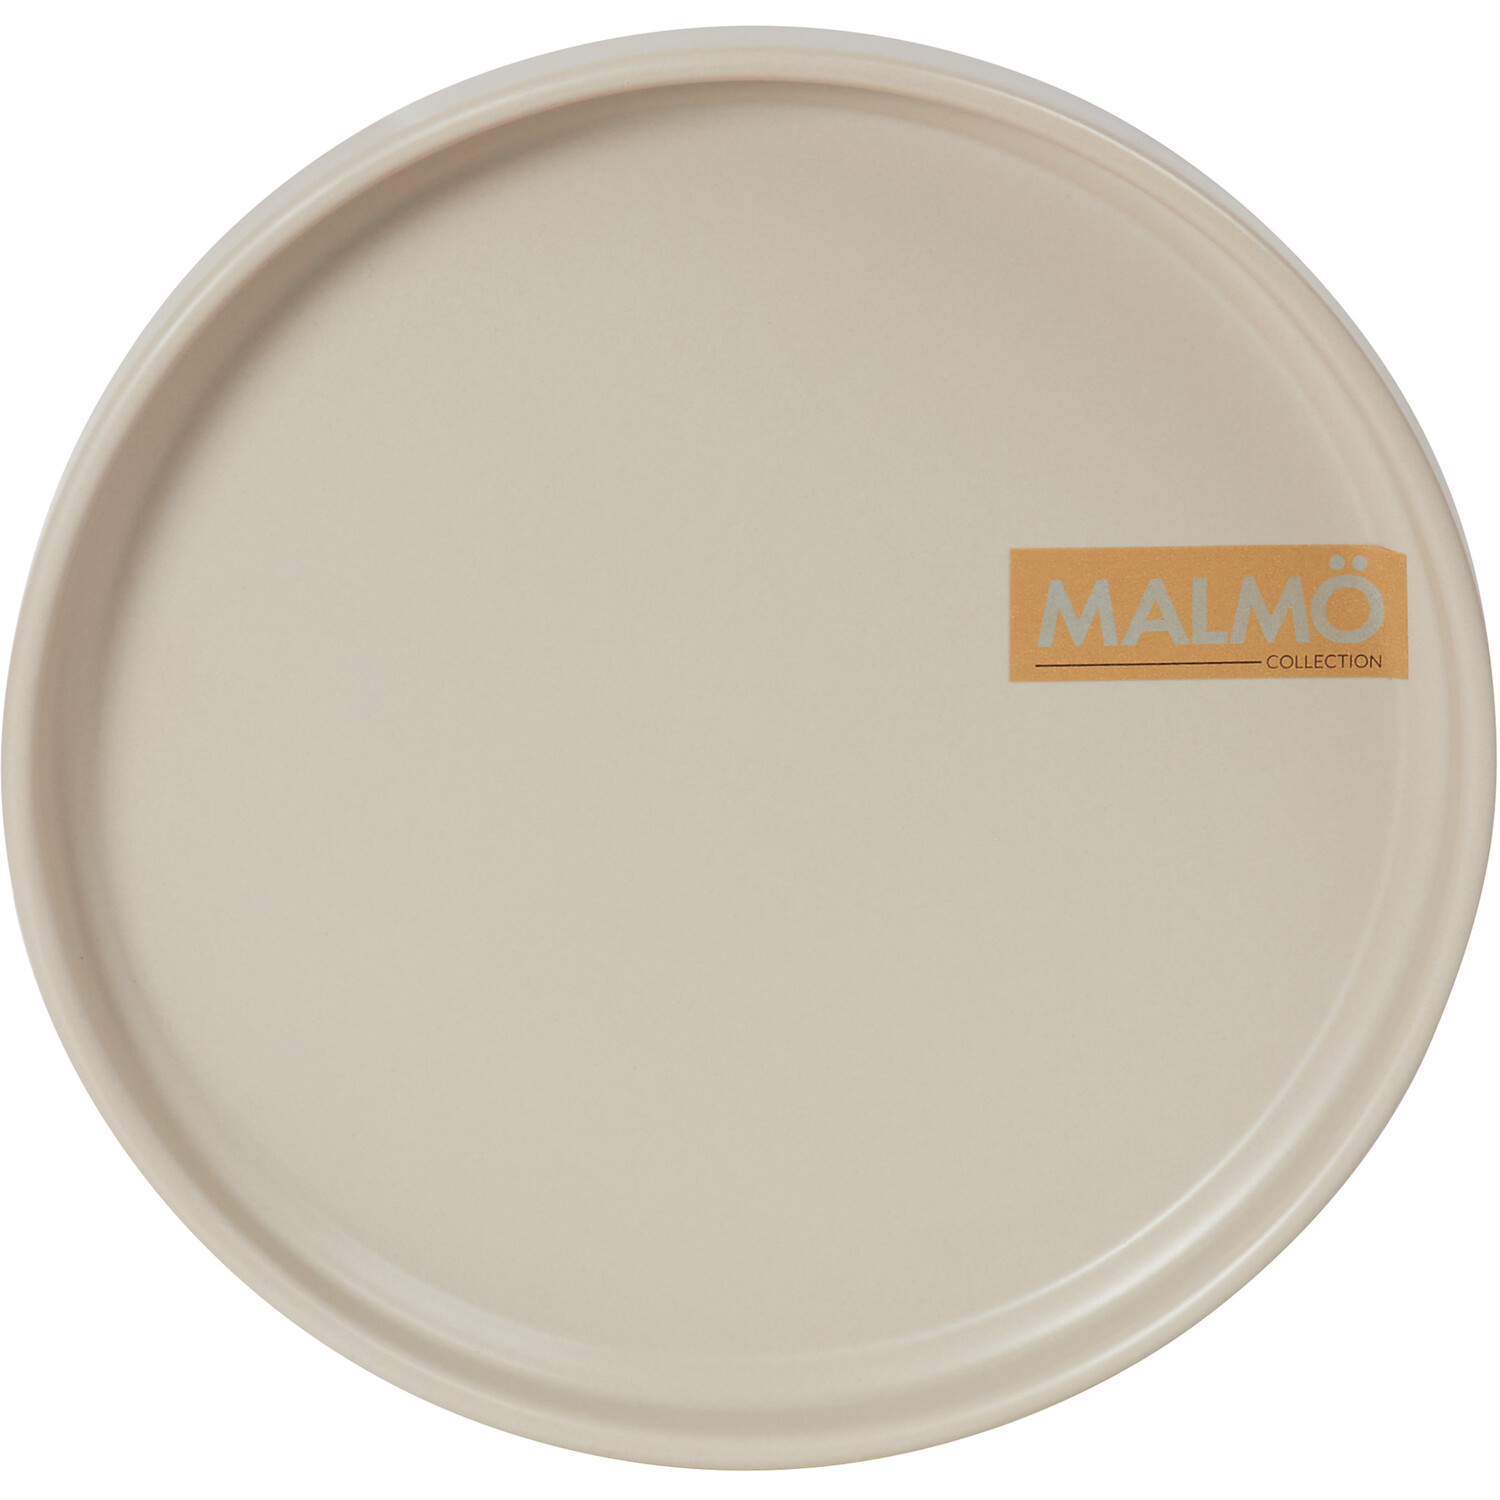 Malmo Stacking Side Plate - Greige Image 2